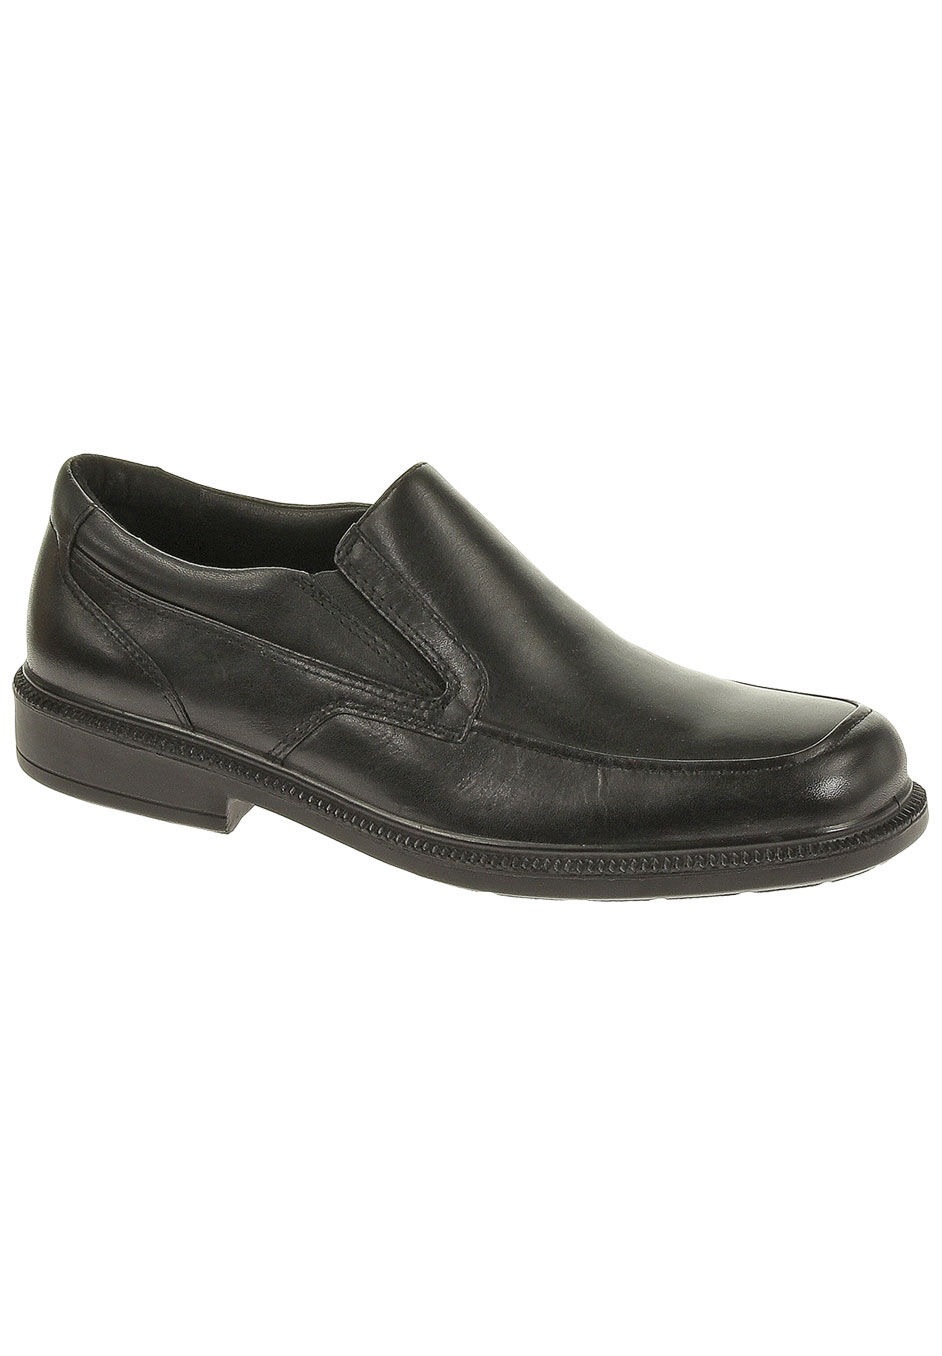 hush puppies wide width shoes